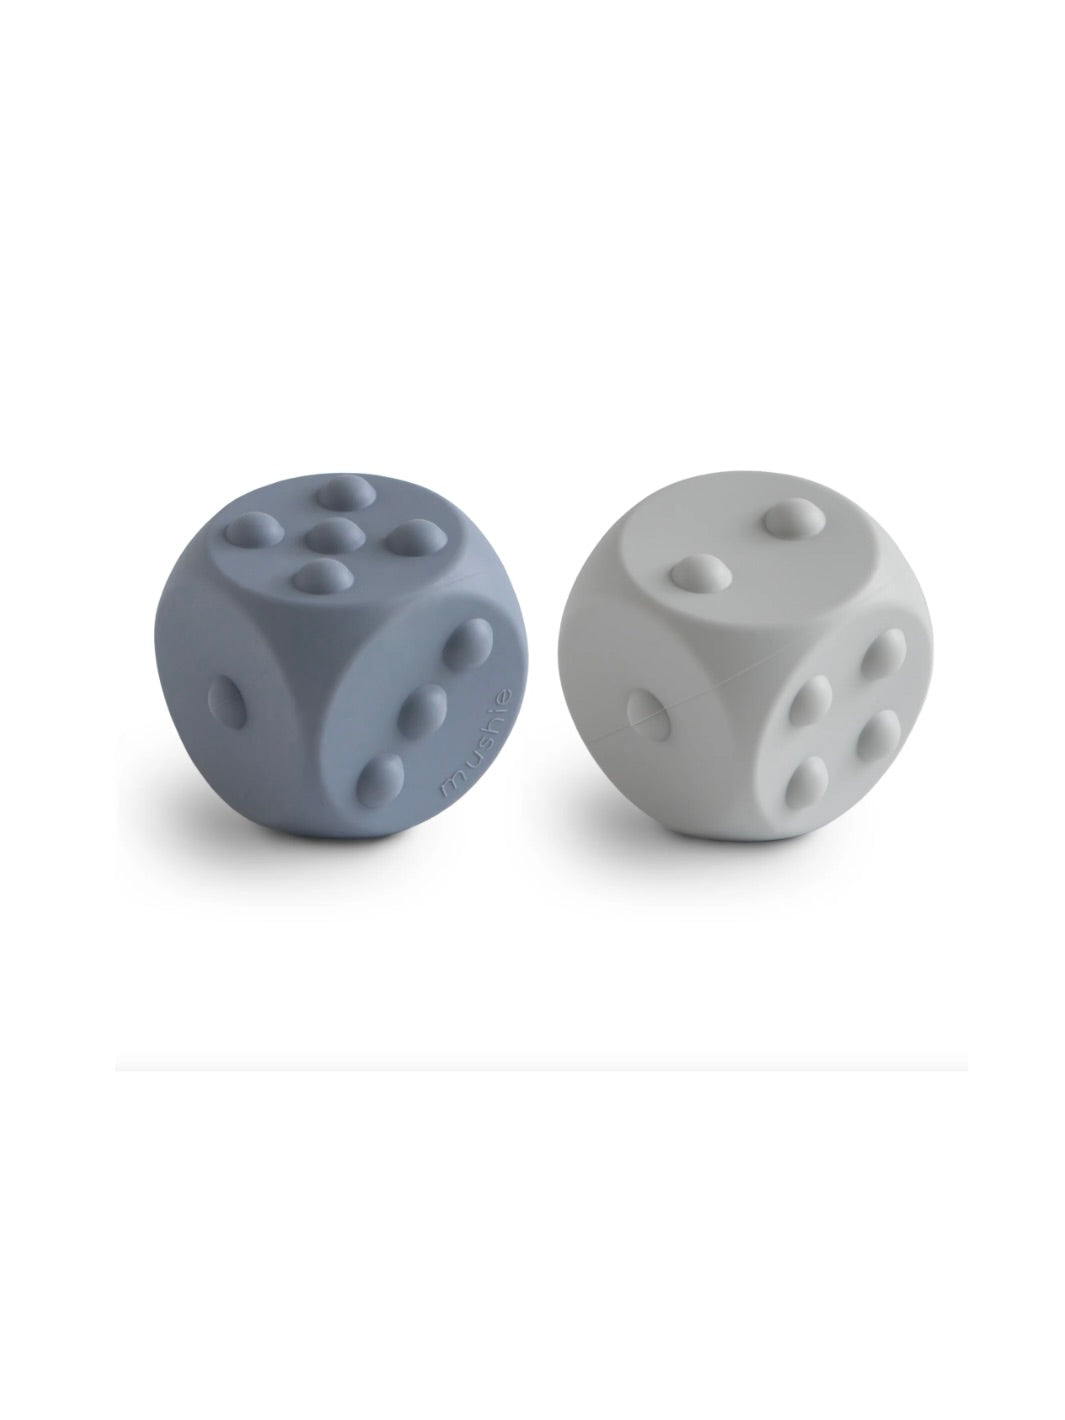 Dice Press Toy 2-Pack